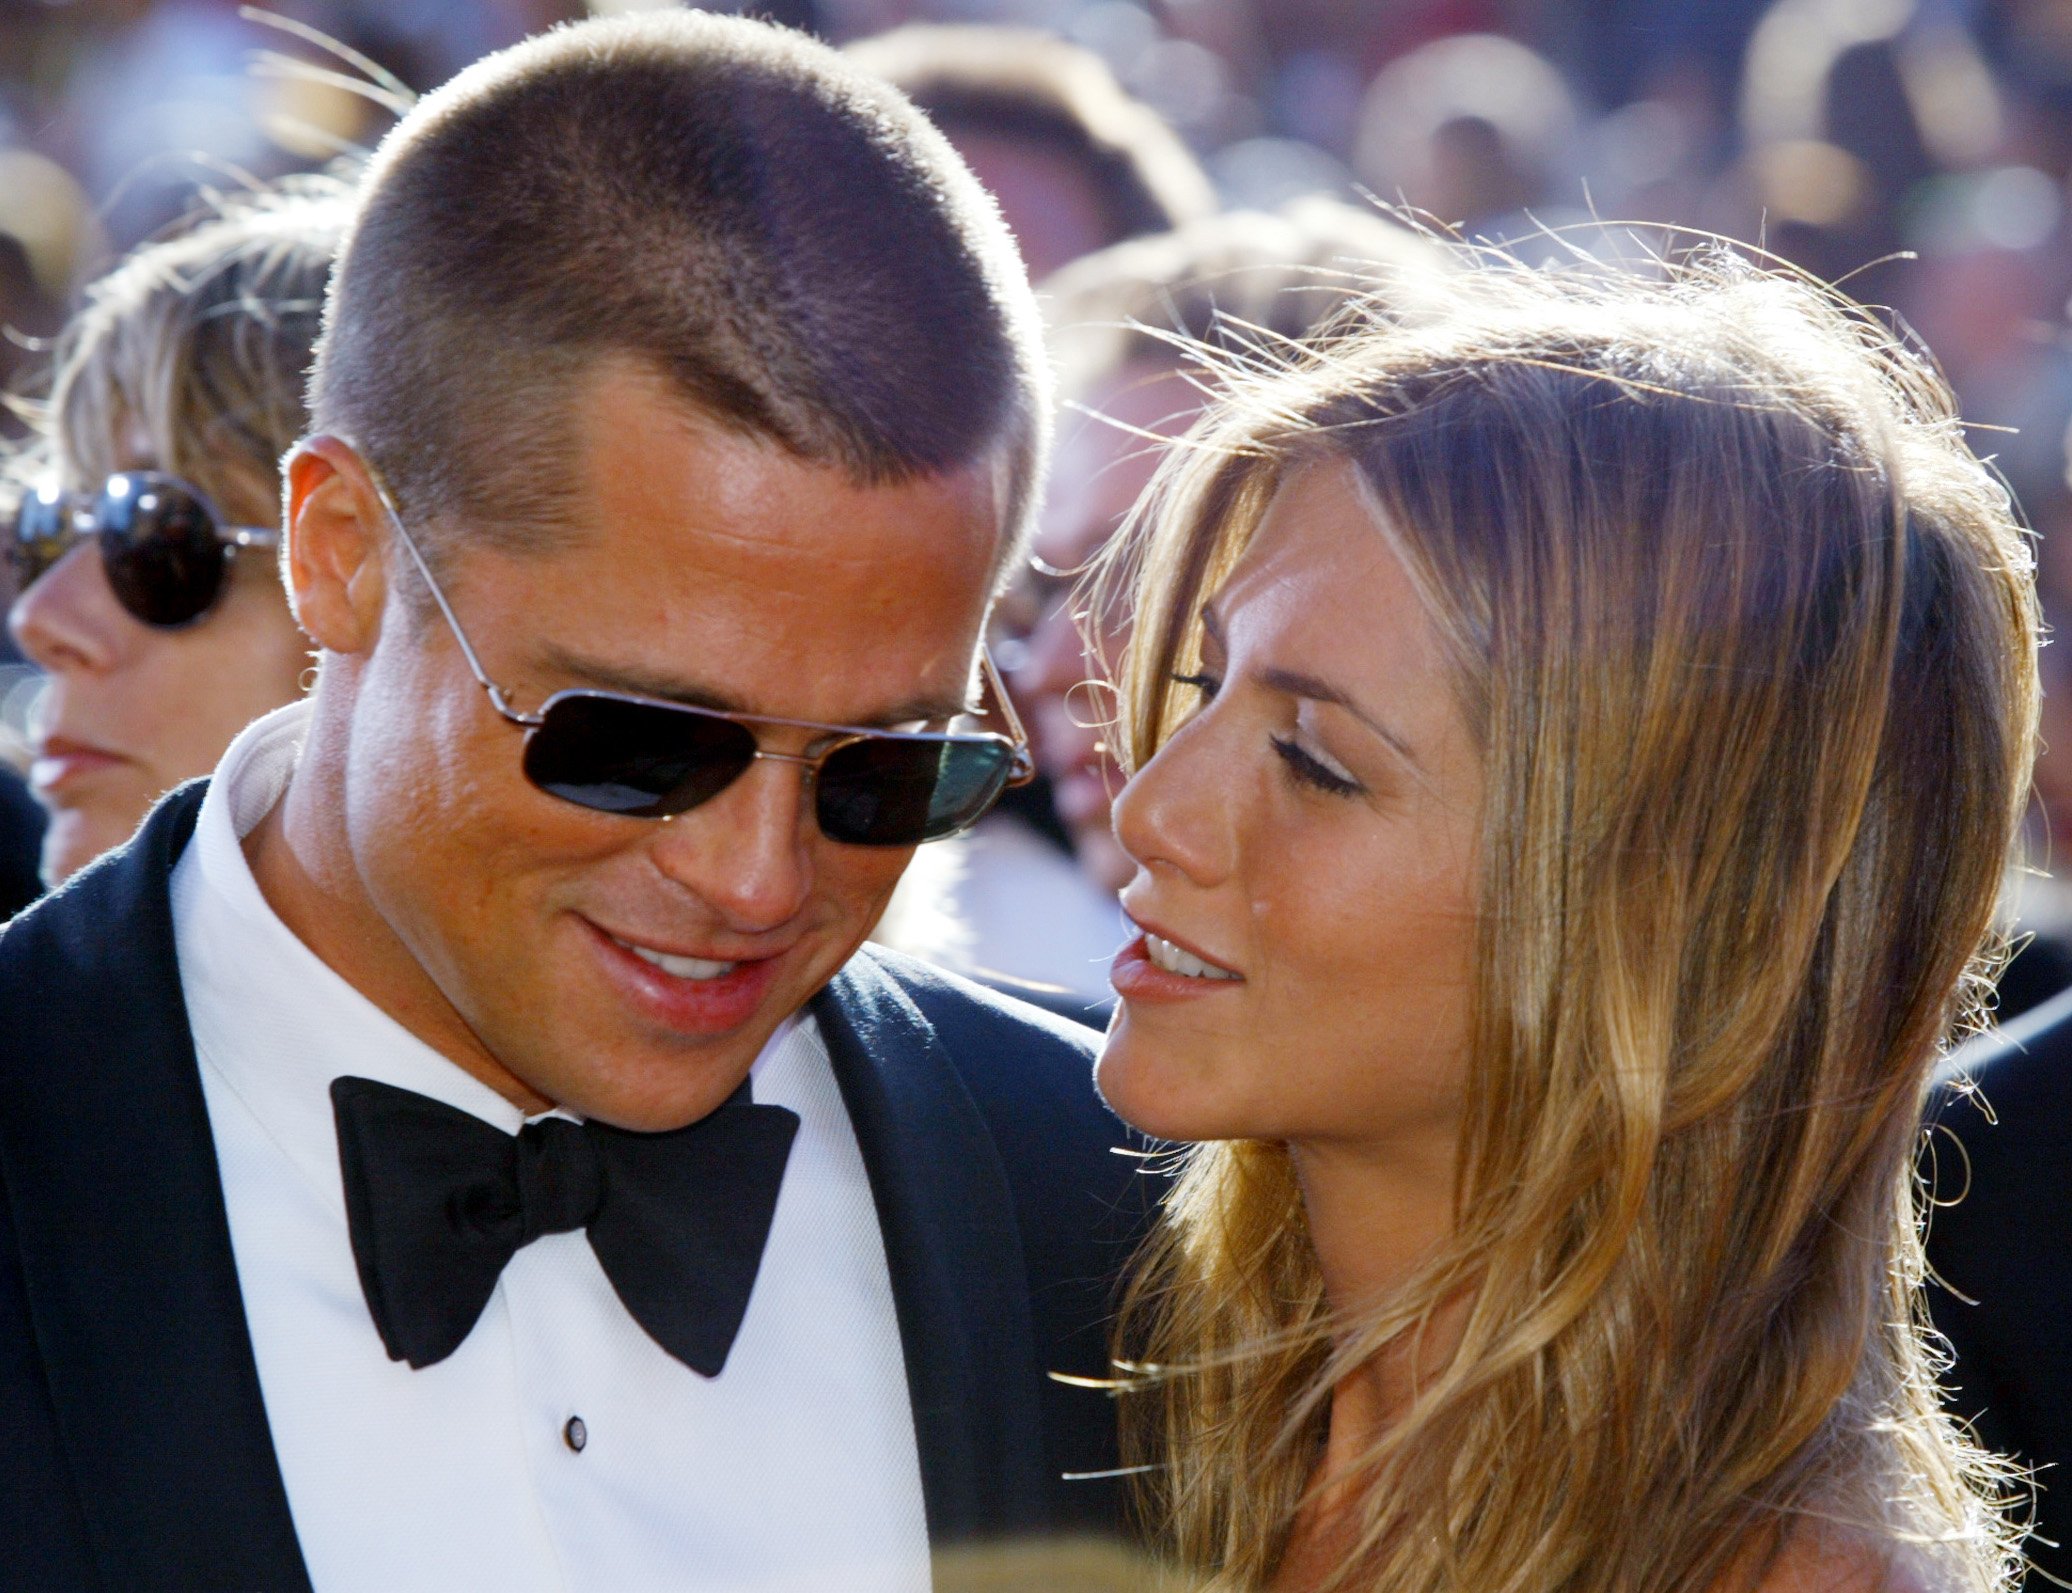 Brad Pitt and Jennifer Aniston arrive at the 56th annual Primetime Emmy Awards at the Shrine Auditorium in Los Angeles, in this September 19, 2004 file photo. Jennifer Aniston filed for divorce on March 25, 2005 from Brad Pitt, some two and a half months after Hollywood's golden couple announced they were separating, court papers in Los Angeles showed. REUTERS/Kimberly White/Files SV/PN - RTR6400